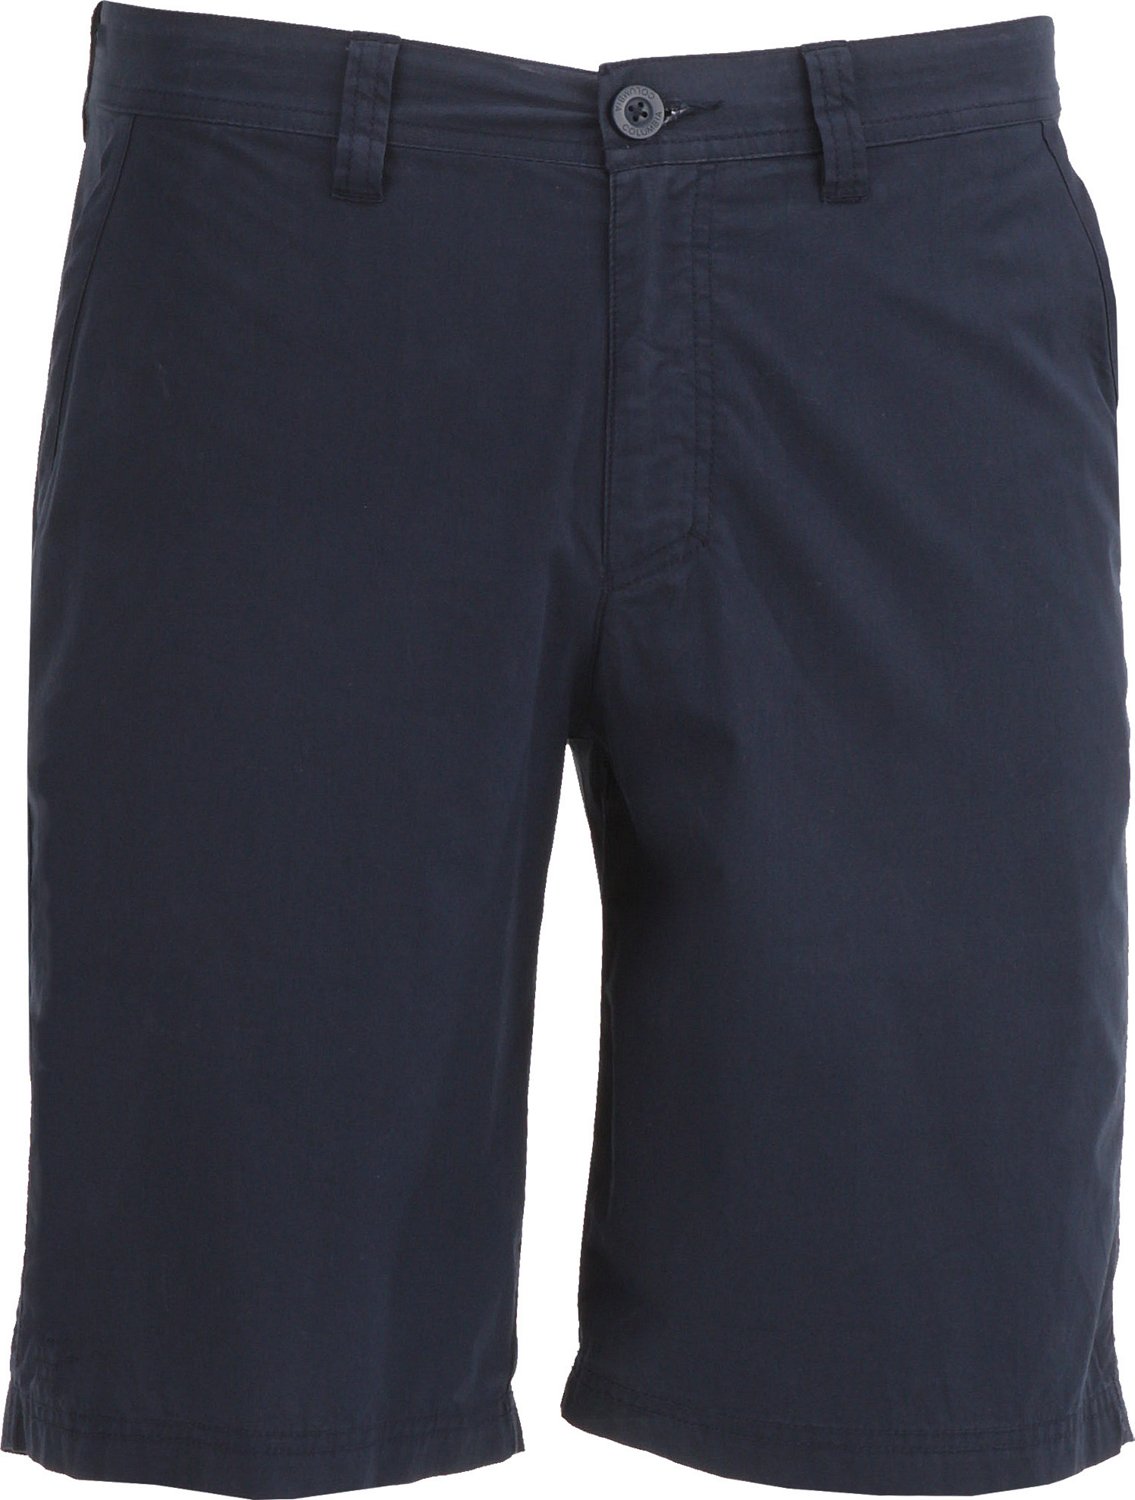 Columbia Sportswear Men's Washed Out Short | Academy